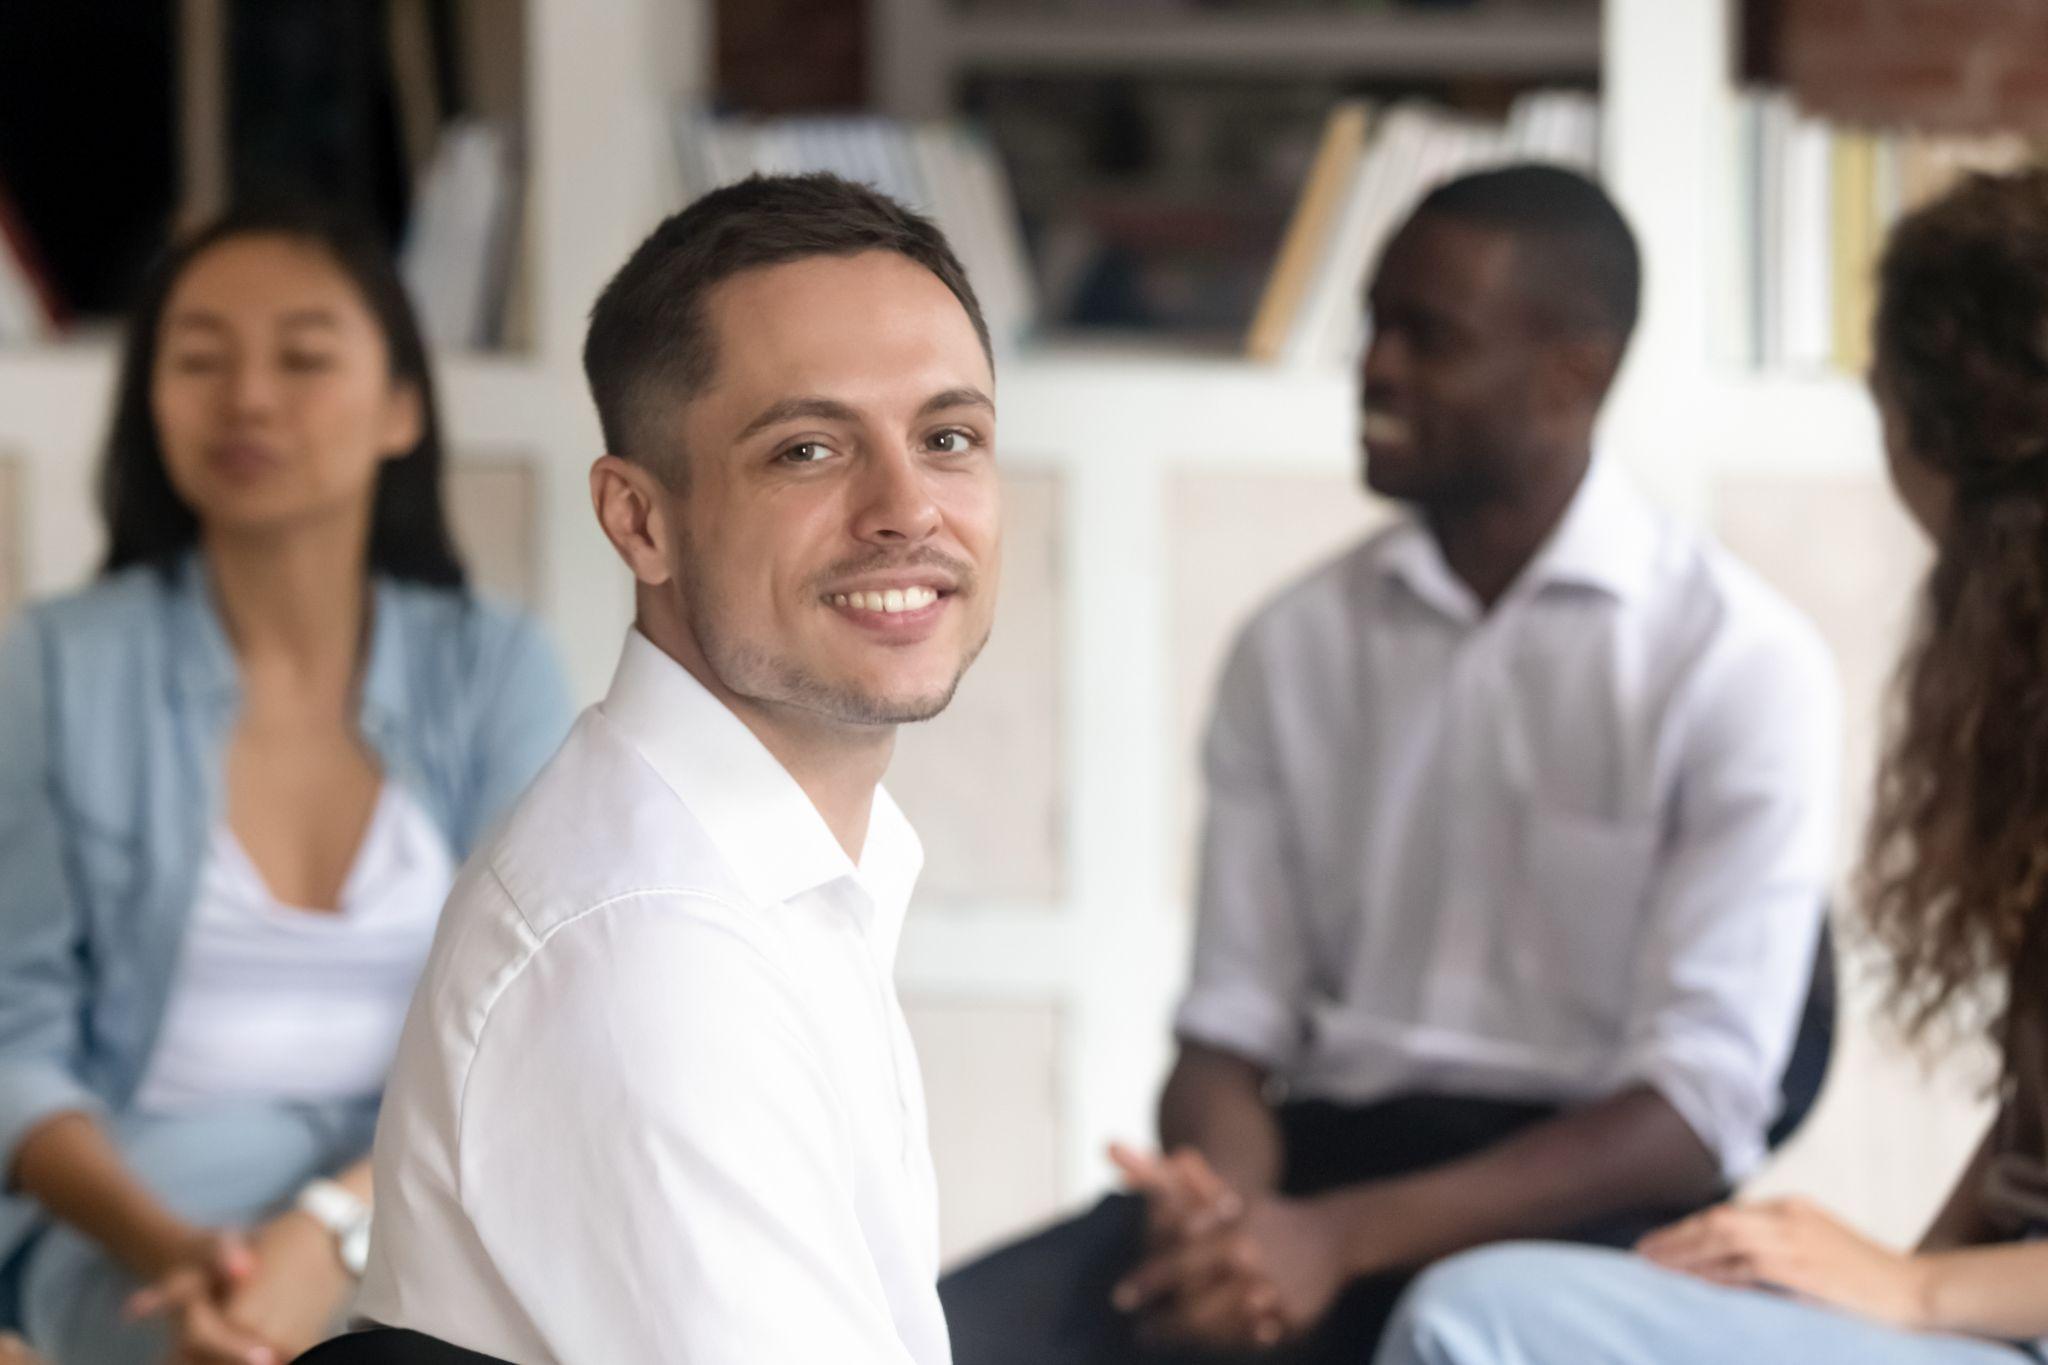 Relieved Caucasian man posing at group therapy session